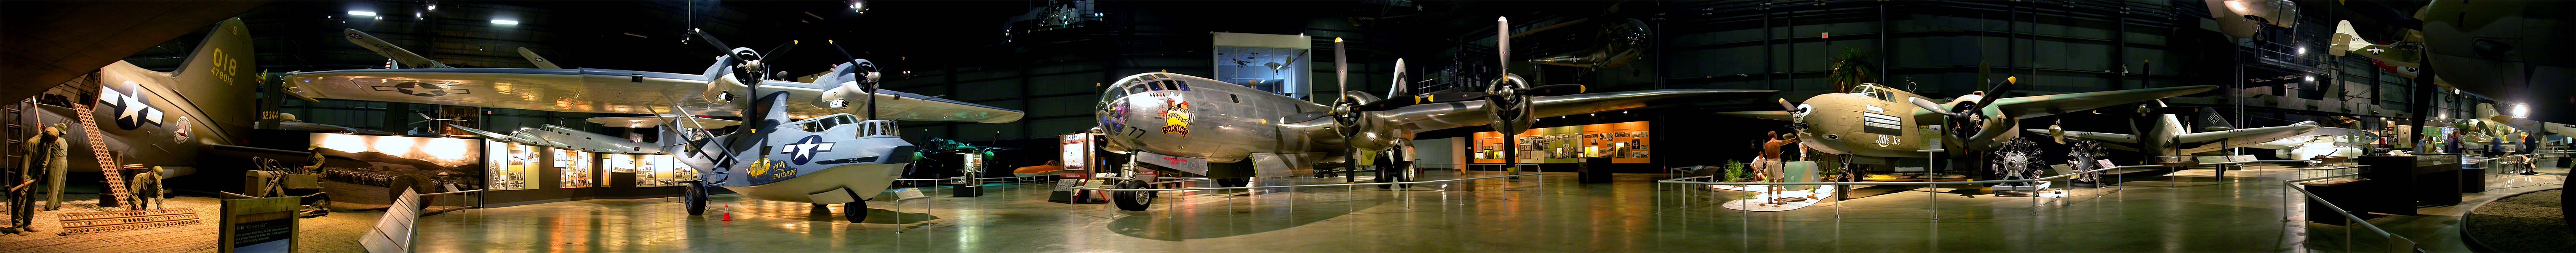 Panorama of the Boeing B-29 Supefortress Bocks Car, a Catalina Flying Boat, A-20 Havoc, and C-46 Commando